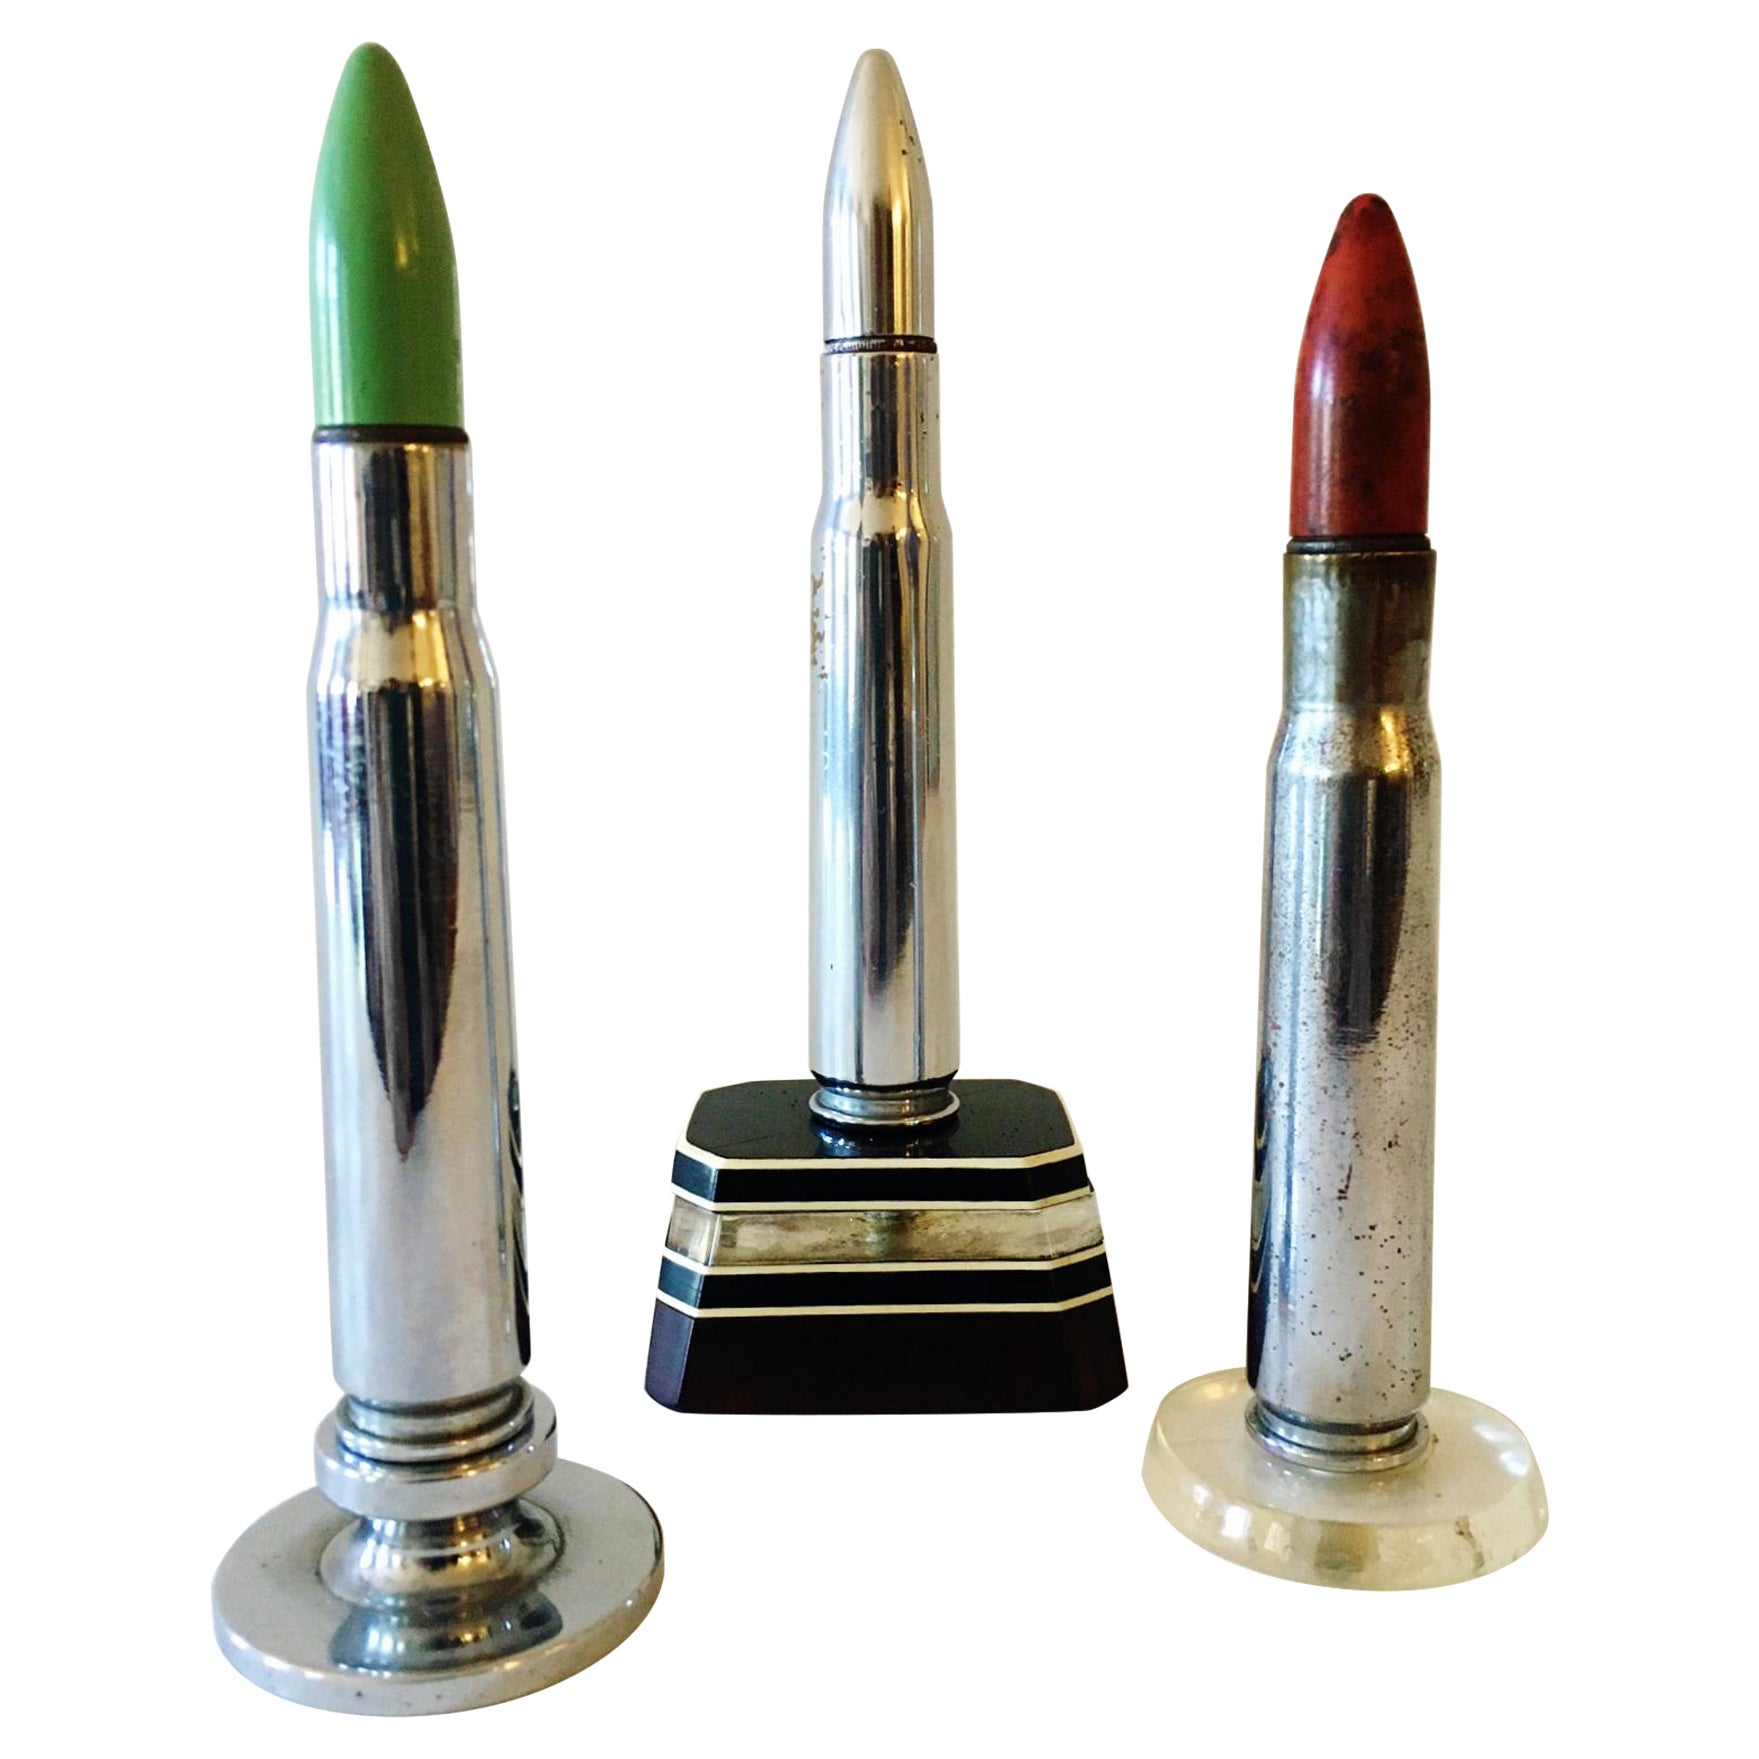 Group of 3 Trench Art American Chrome 50 Cal Cartridge Wheel & Flint Lighters For Sale